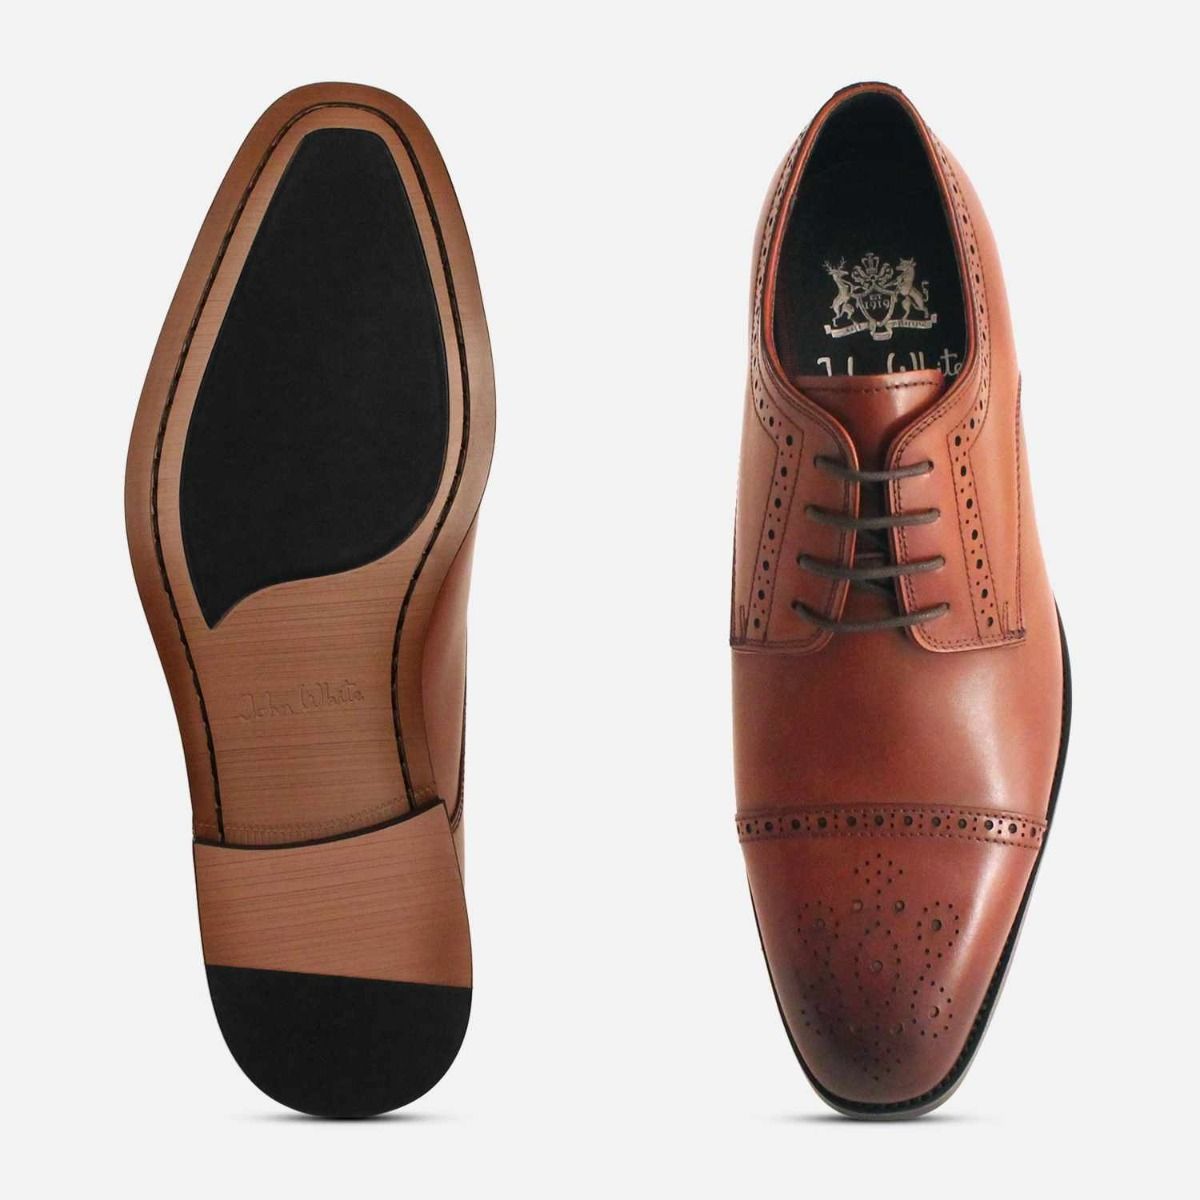 John White Tan Brown Lace Up Brogues with Rubber Sole